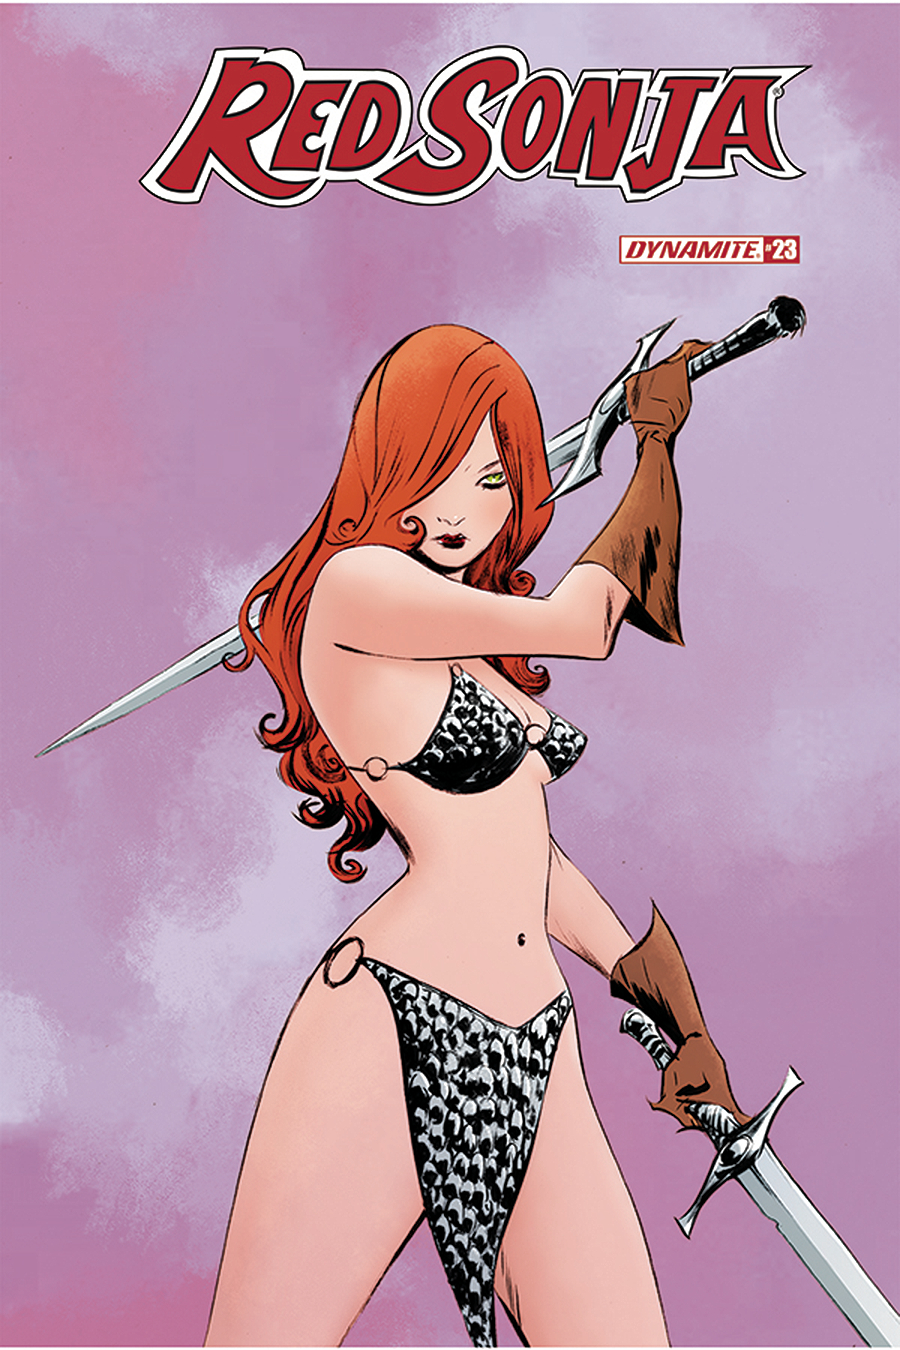 Red Sonja #23 Cover A Lee